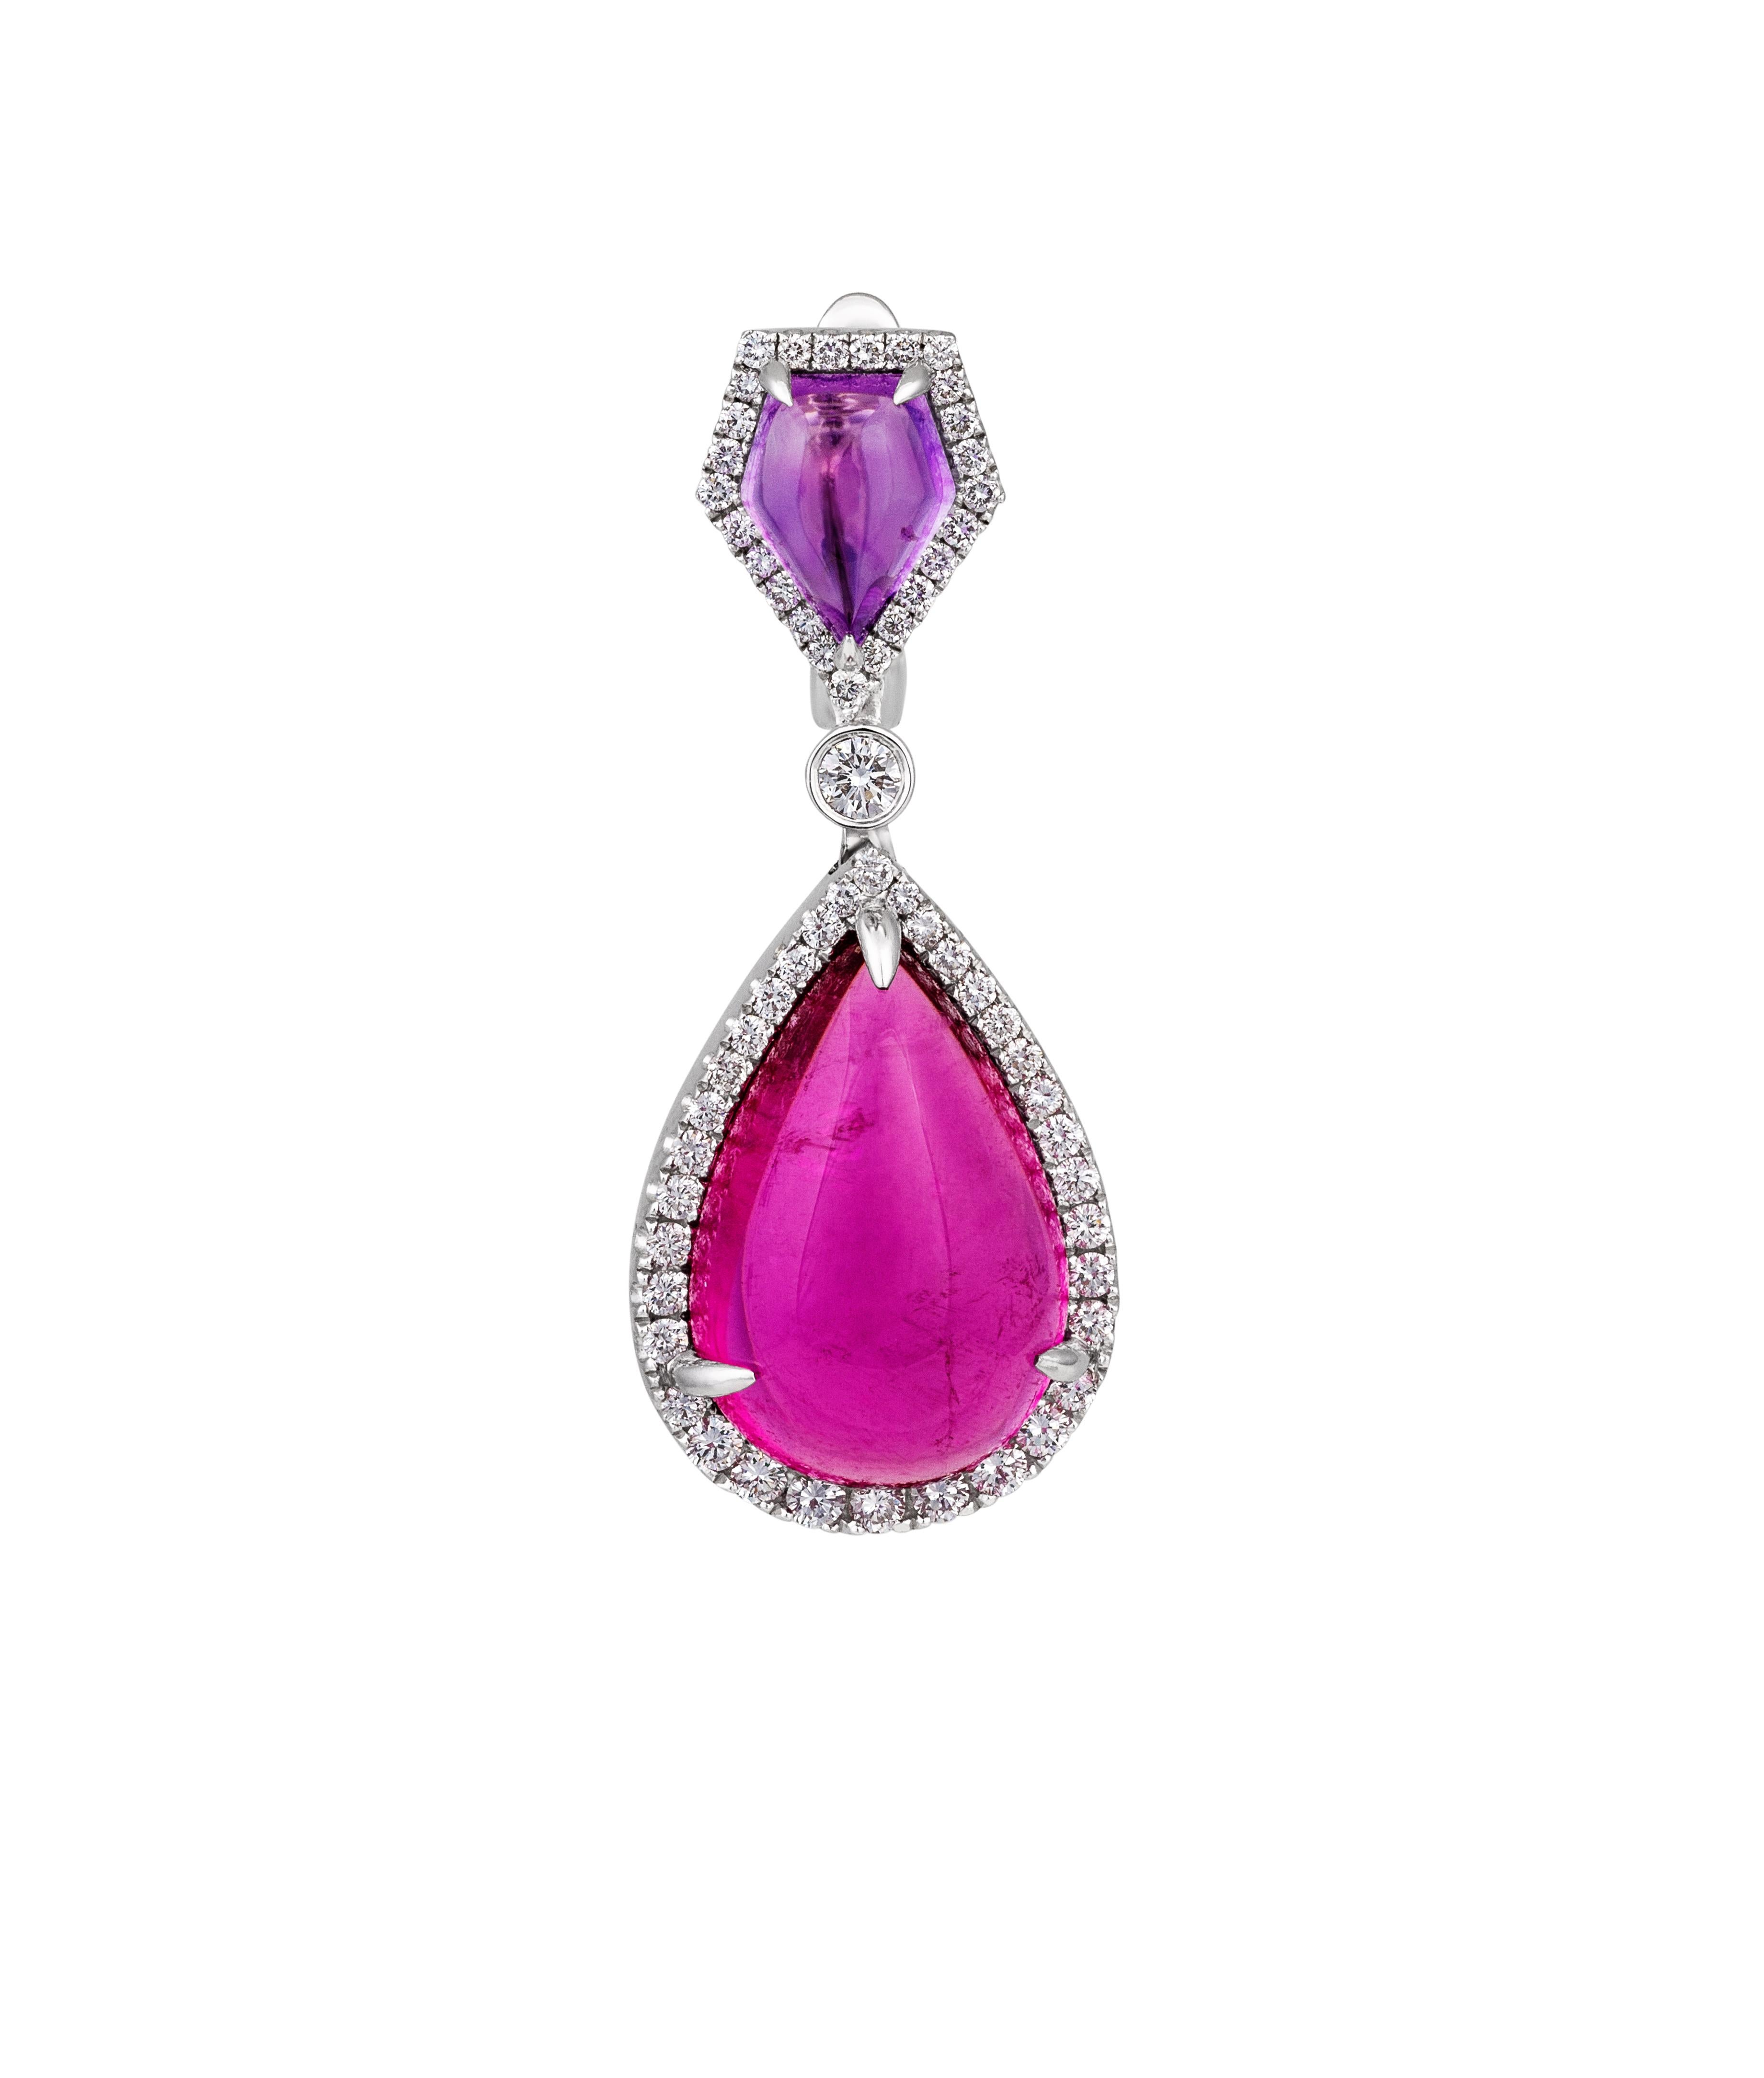 Renaissance 3.12ct Amethyst 19.87ct Ruby and 1.14ct Diamond Dangle Earrings For Sale